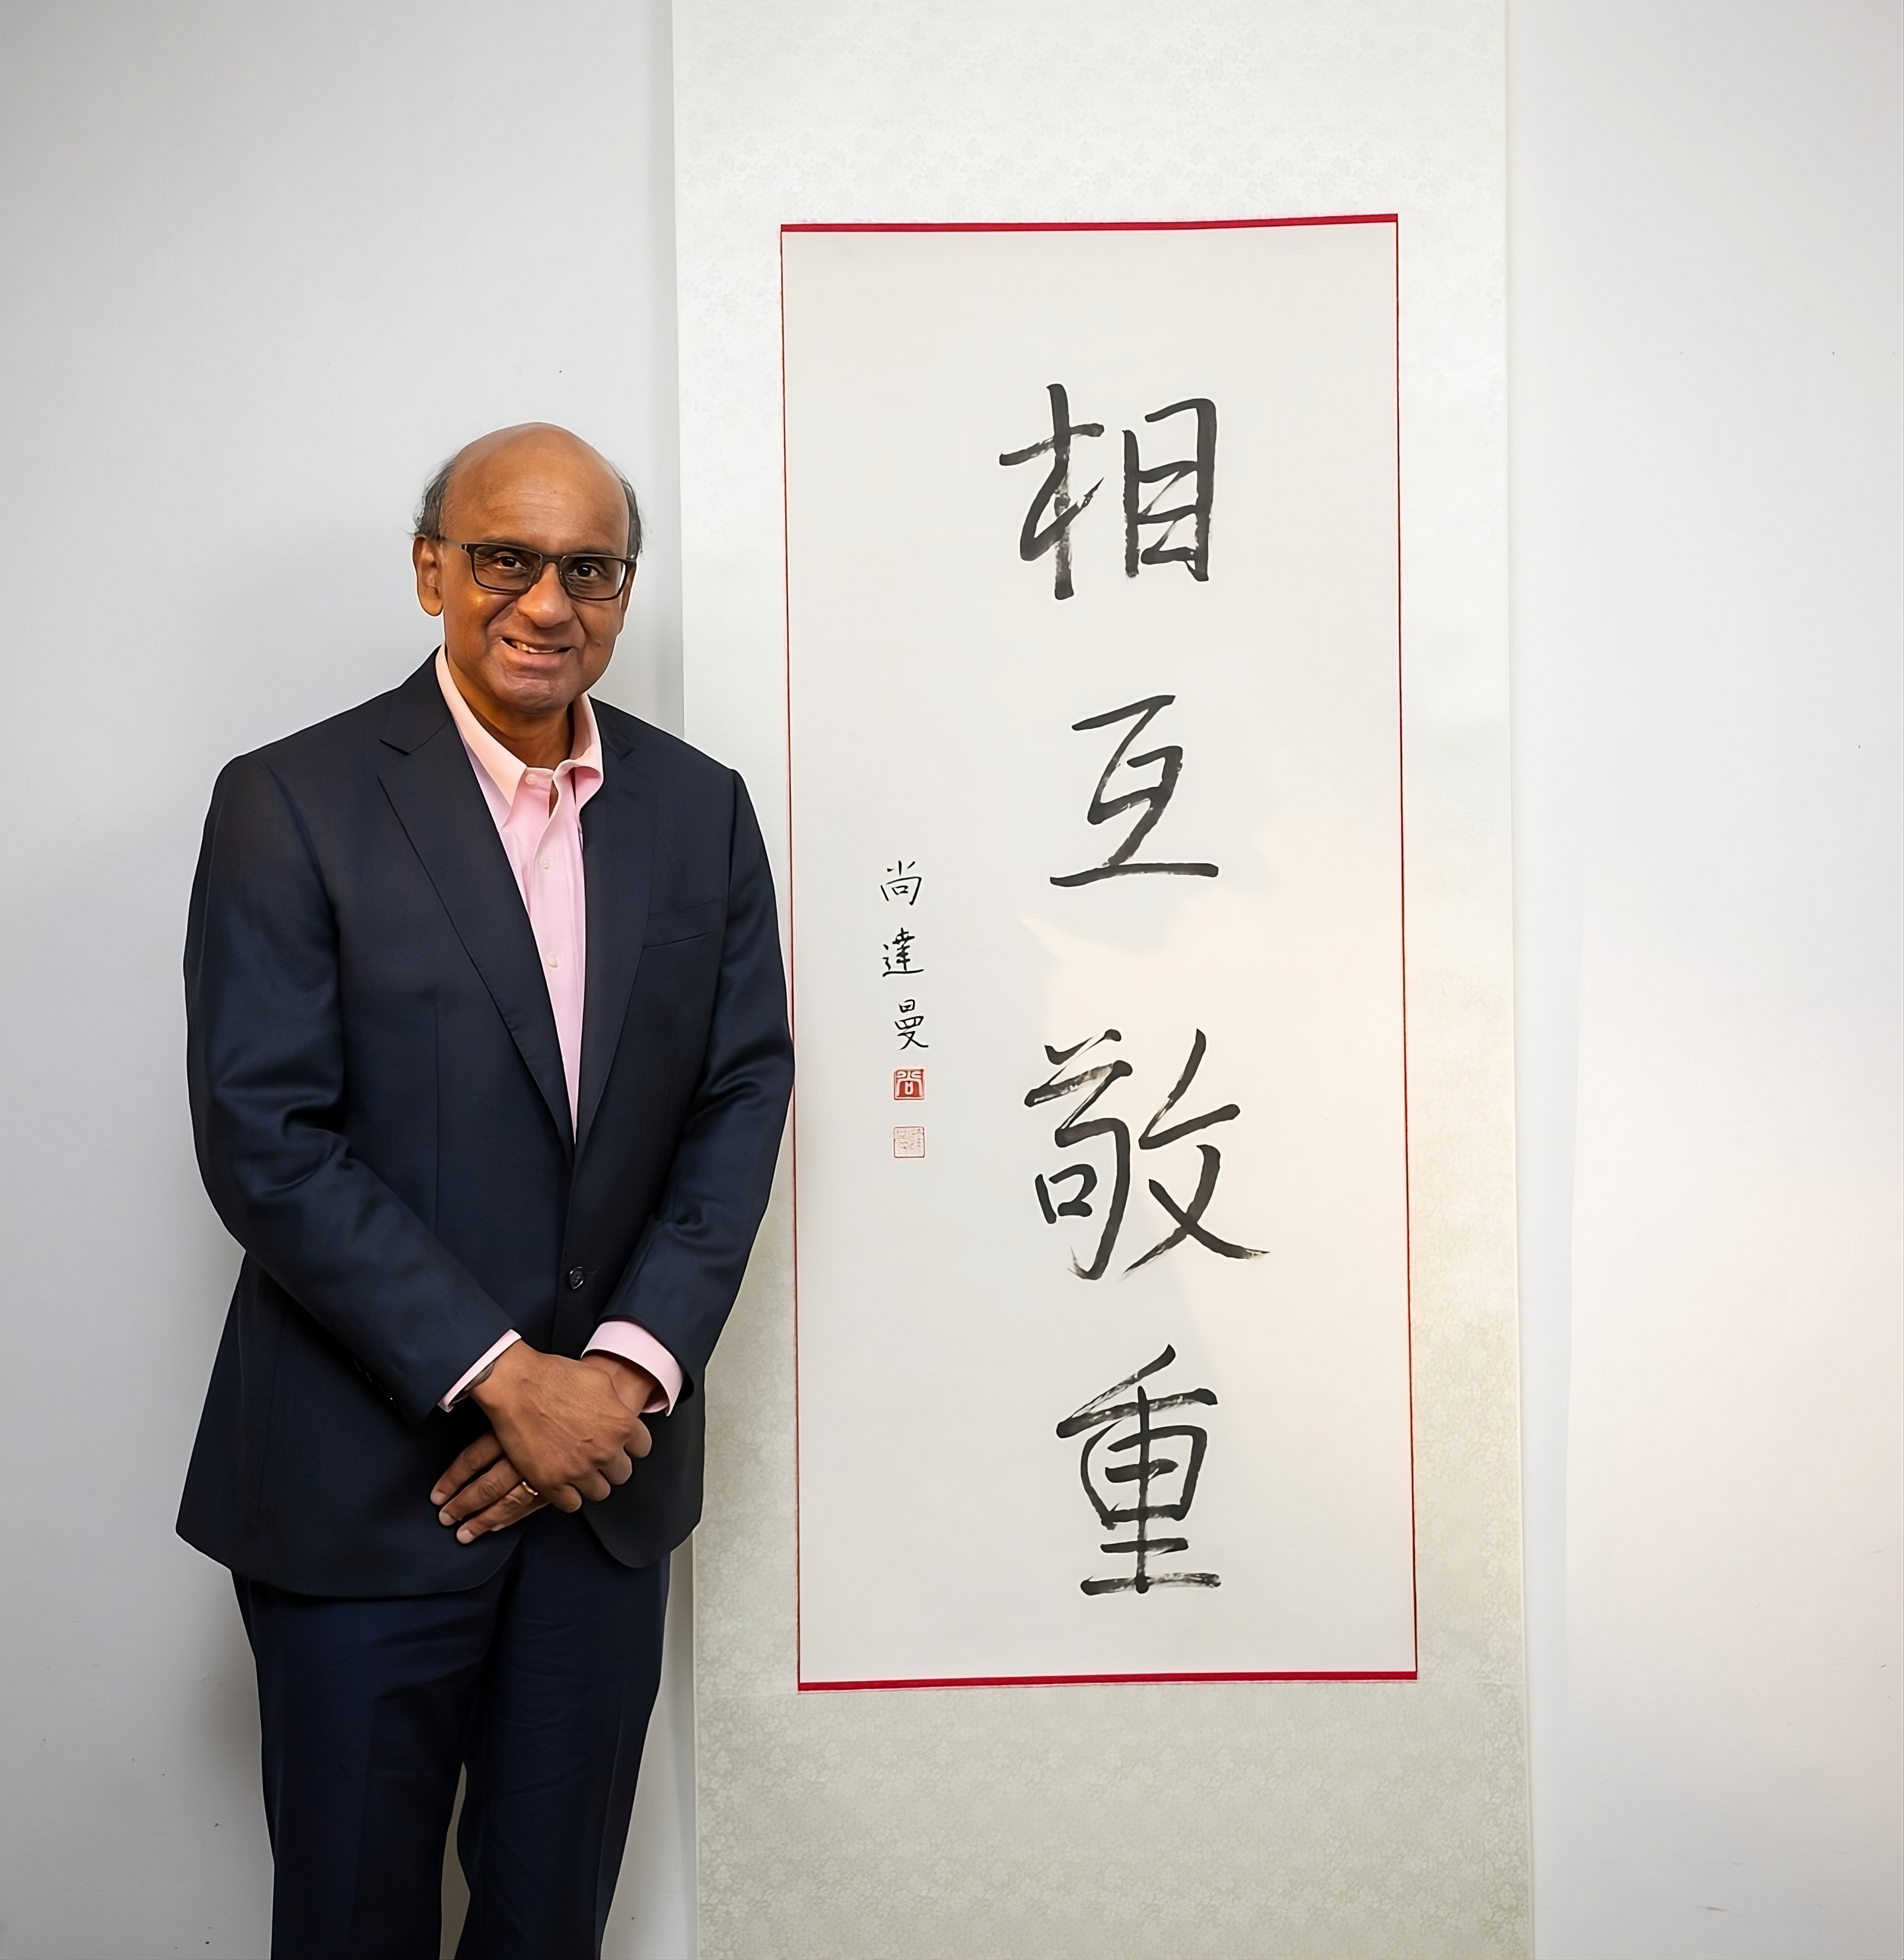 Tharman Shanmugaratnam poses for a photograph after his exclusive interview with the Post ahead of Singapore’s September 1 election. Photo: Cuble Agency/Handout